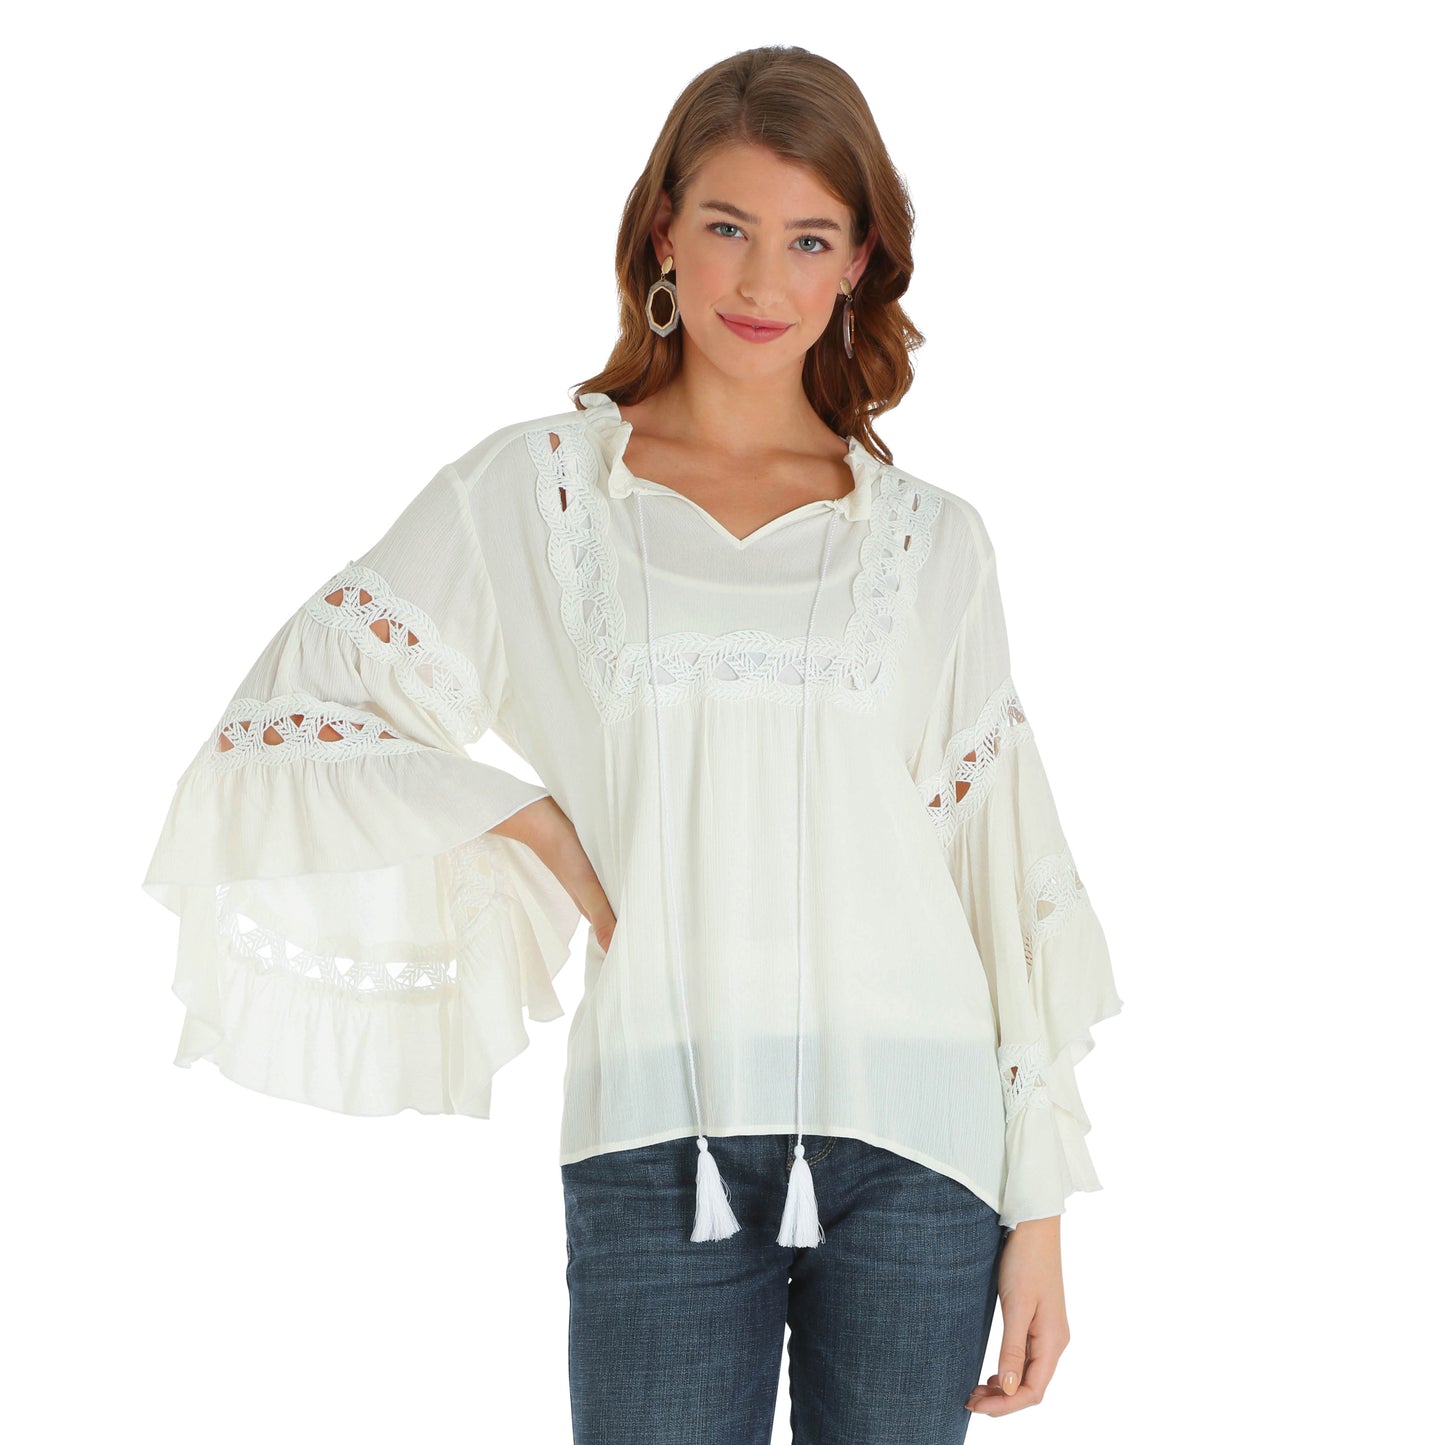 Wrangler Ladies Embroidered Ivory L/S Peasant Top - LW2048M